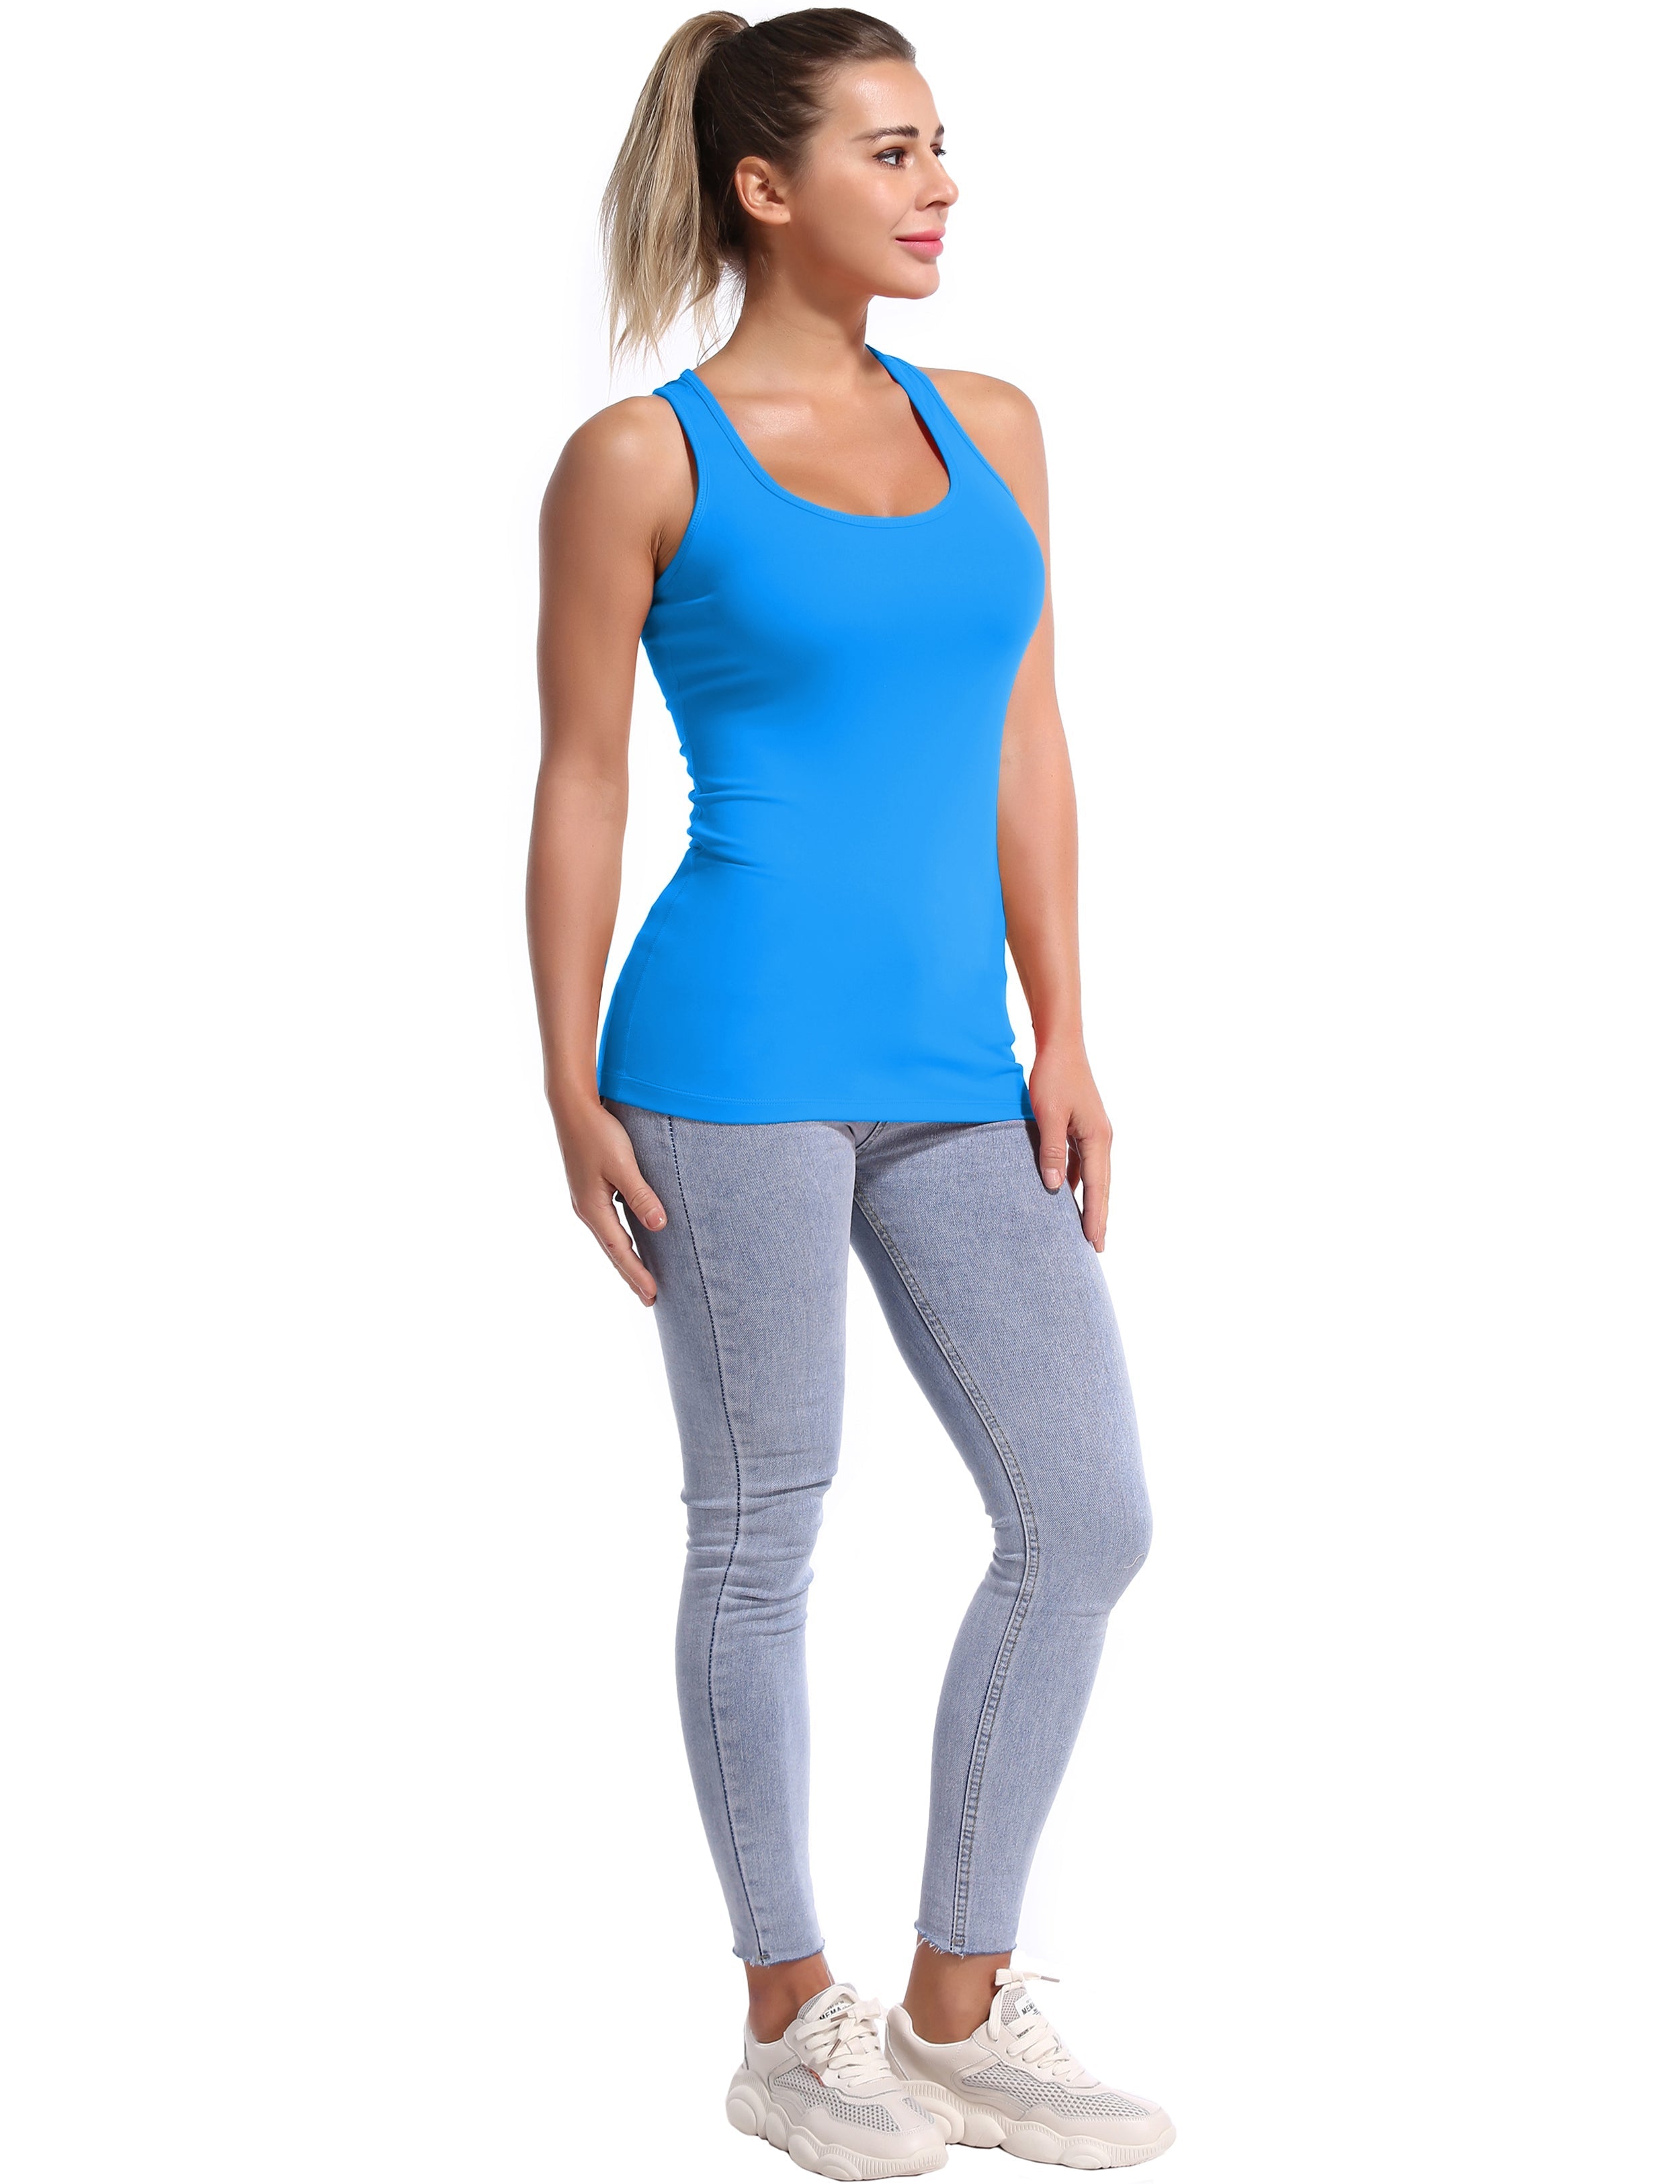 Racerback Athletic Tank Tops deepskyblue 92%Nylon/8%Spandex(Cotton Soft) Designed for Tall Size Tight Fit So buttery soft, it feels weightless Sweat-wicking Four-way stretch Breathable Contours your body Sits below the waistband for moderate, everyday coverage